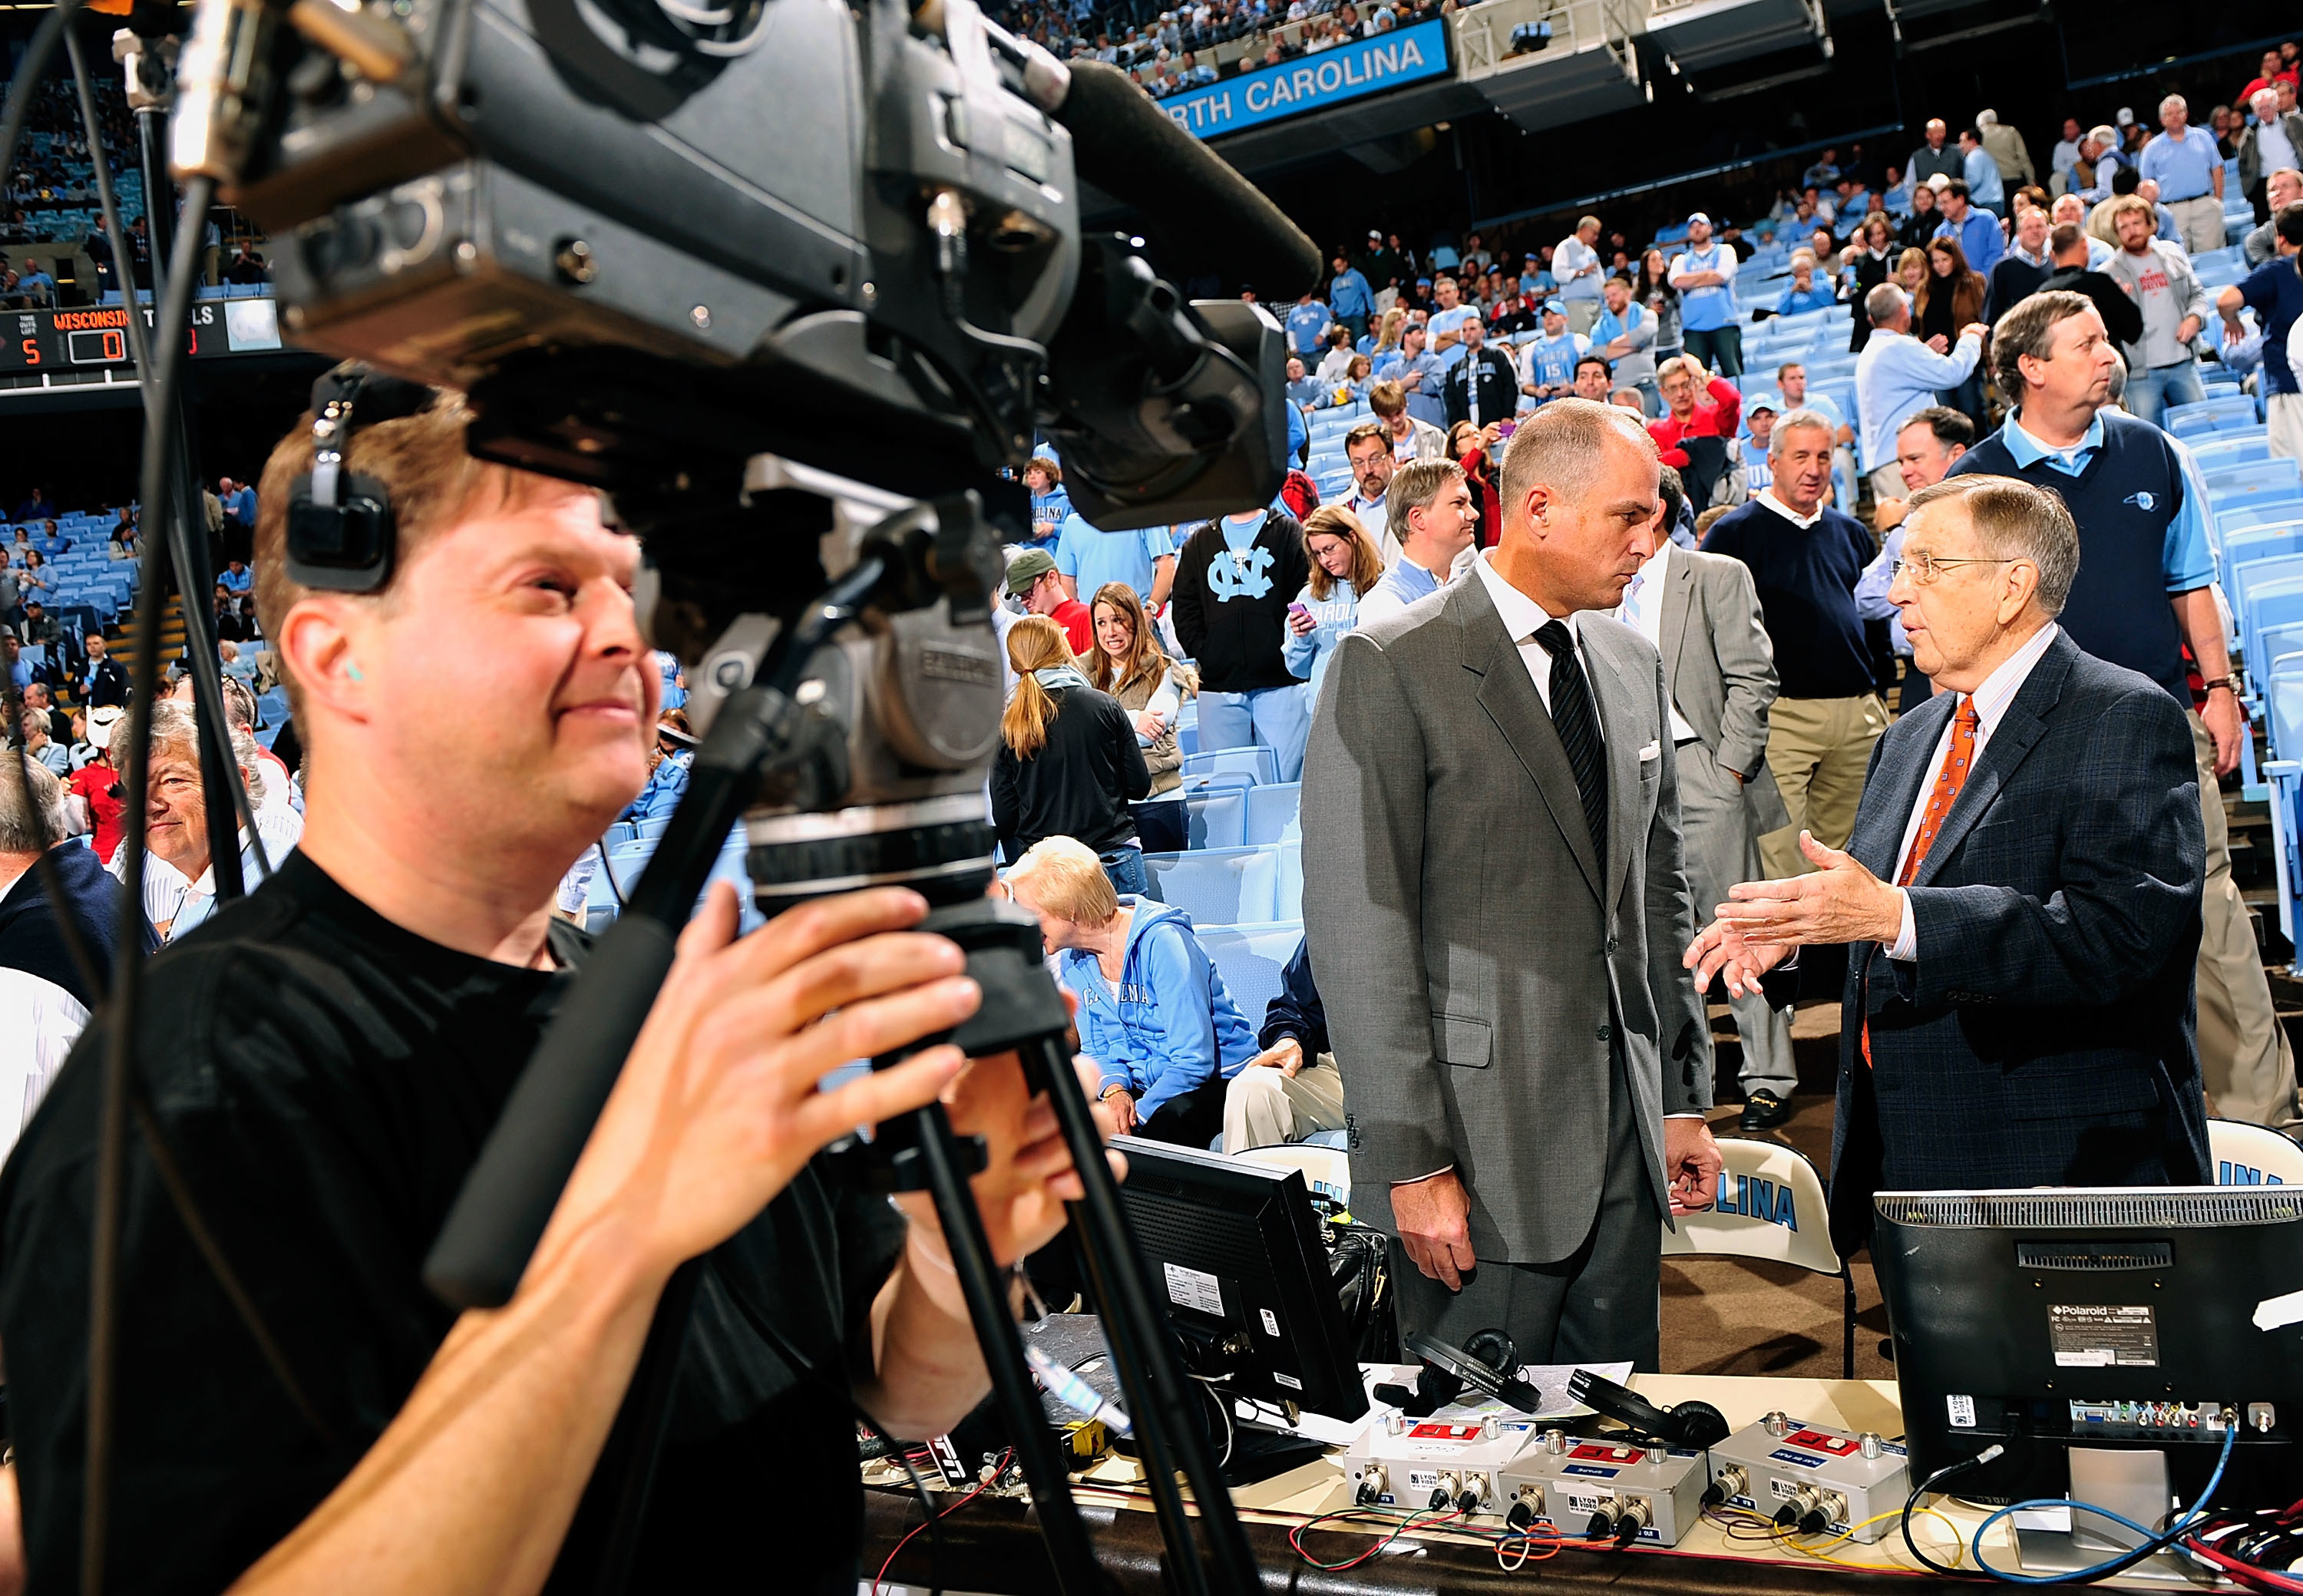 ESPN announcers Jay Bilas and Brent Musberger talk before a game between the North Carolina Tar Heels and the Wisconsin Badgers at the Dean Smith Center on November 30, 2011